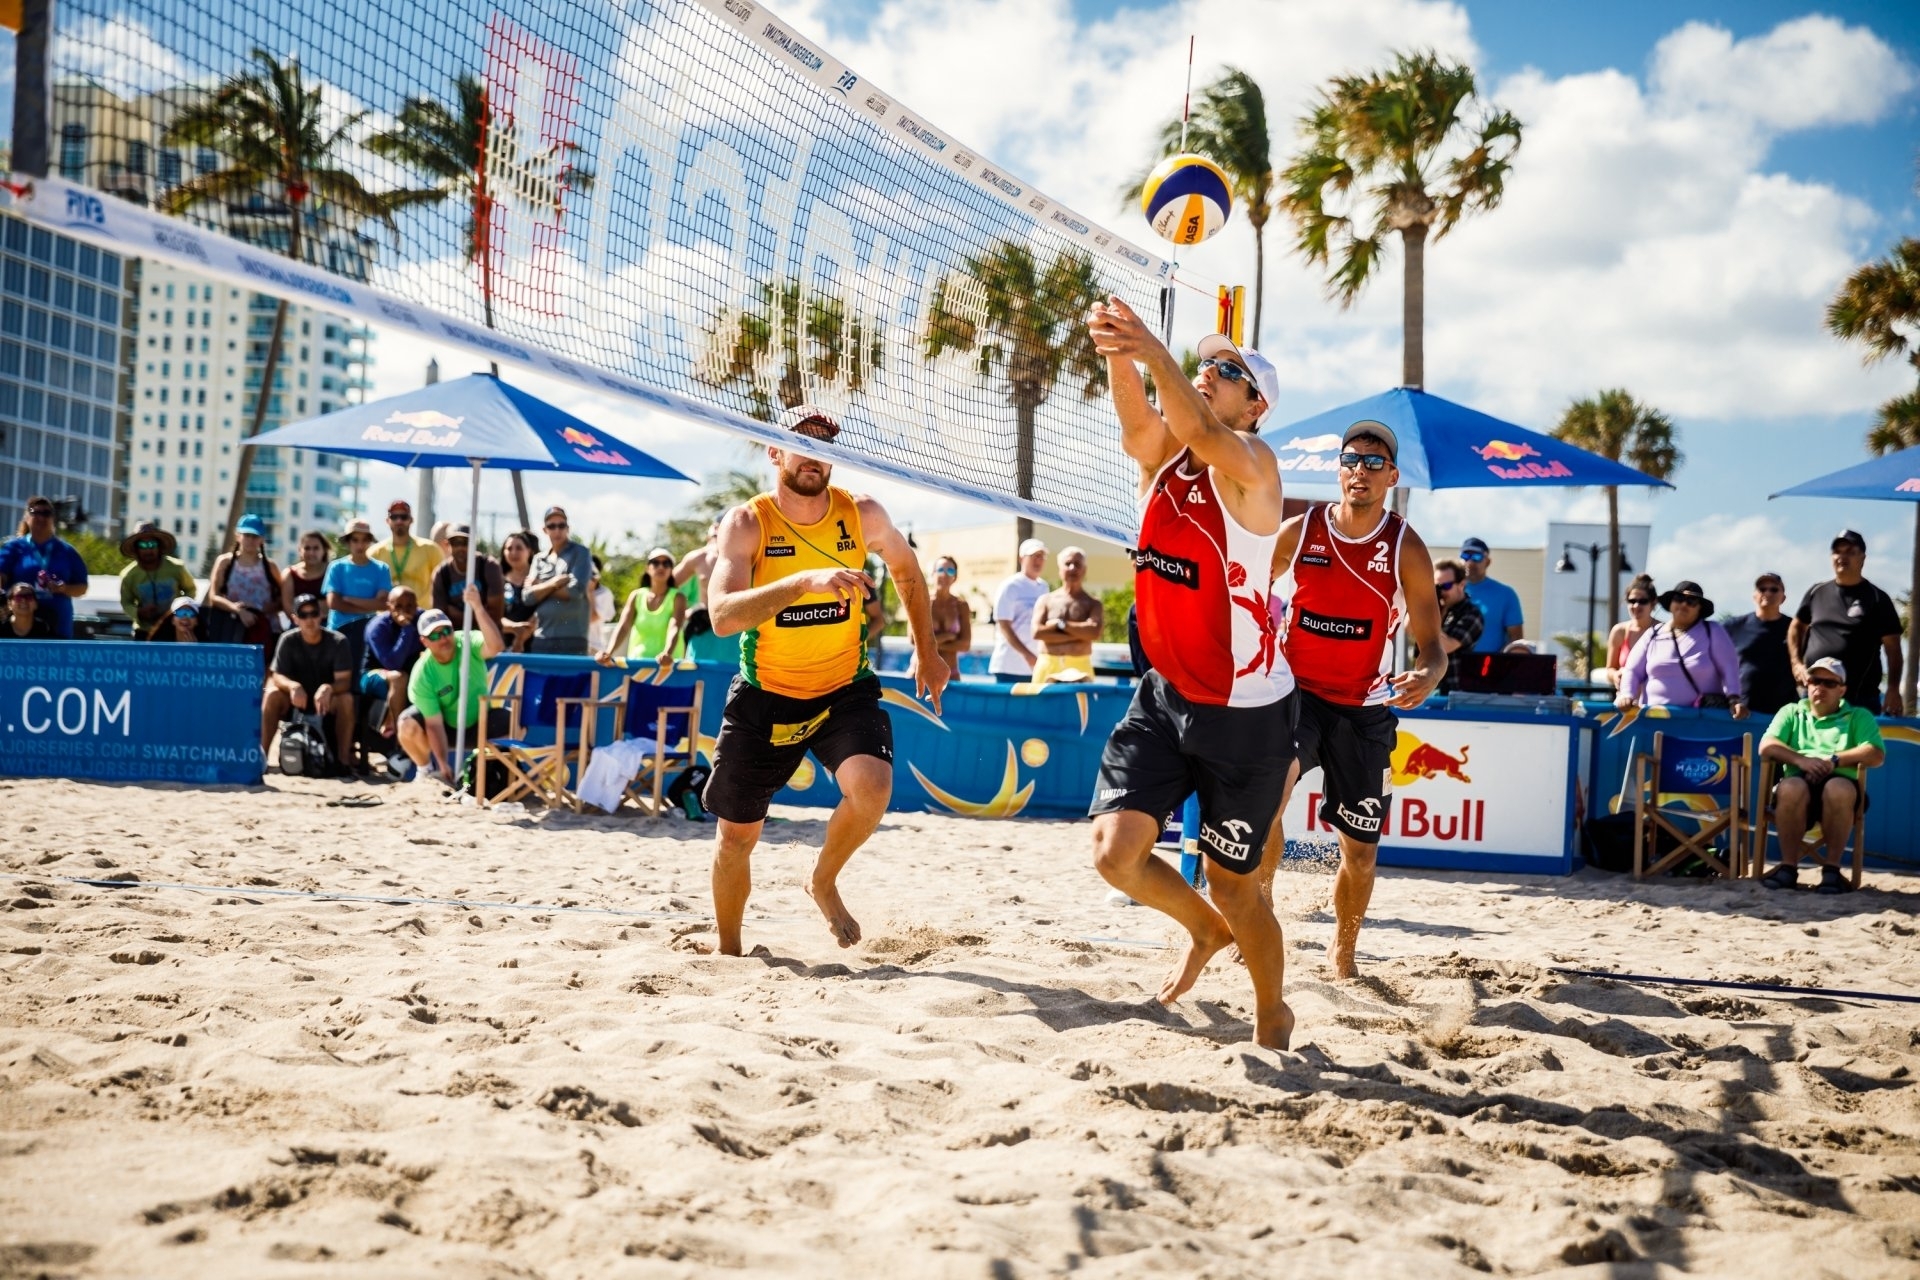 Piotr and Bartotz in action against 2016 Olympic champs Alison/Bruno at last season's Fort Lauderdale Major